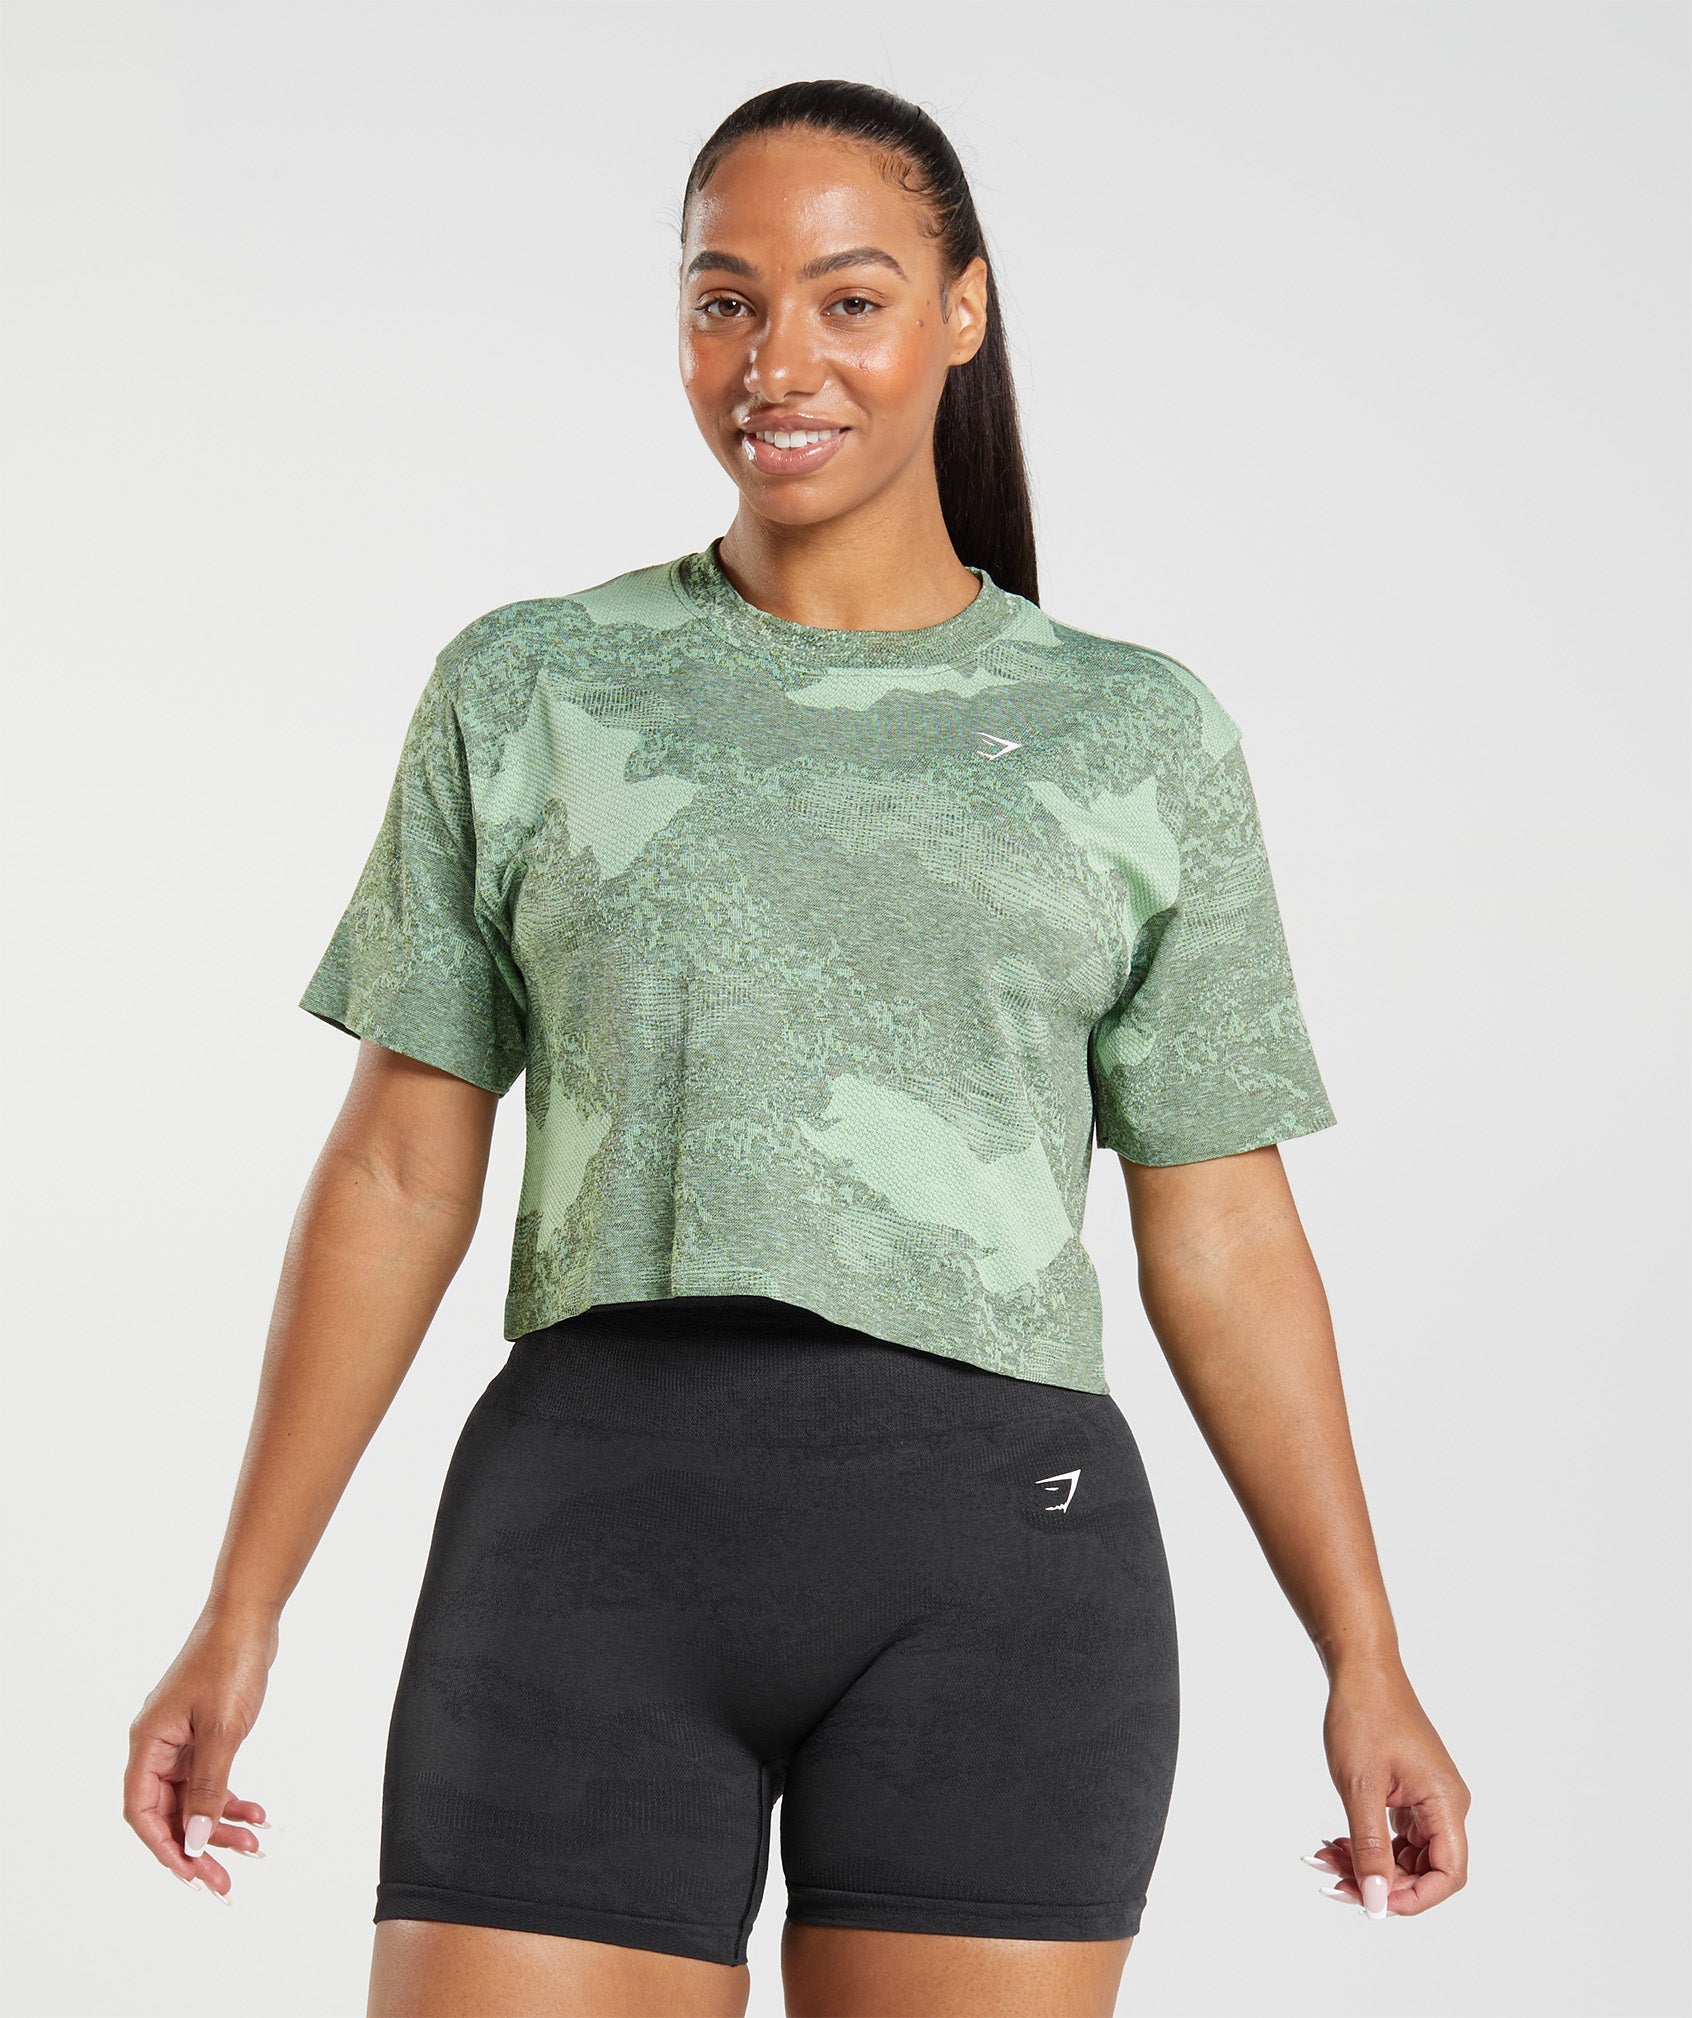 Adapt Camo Seamless Crop Top in Aloe Green/Moss Olive - view 1